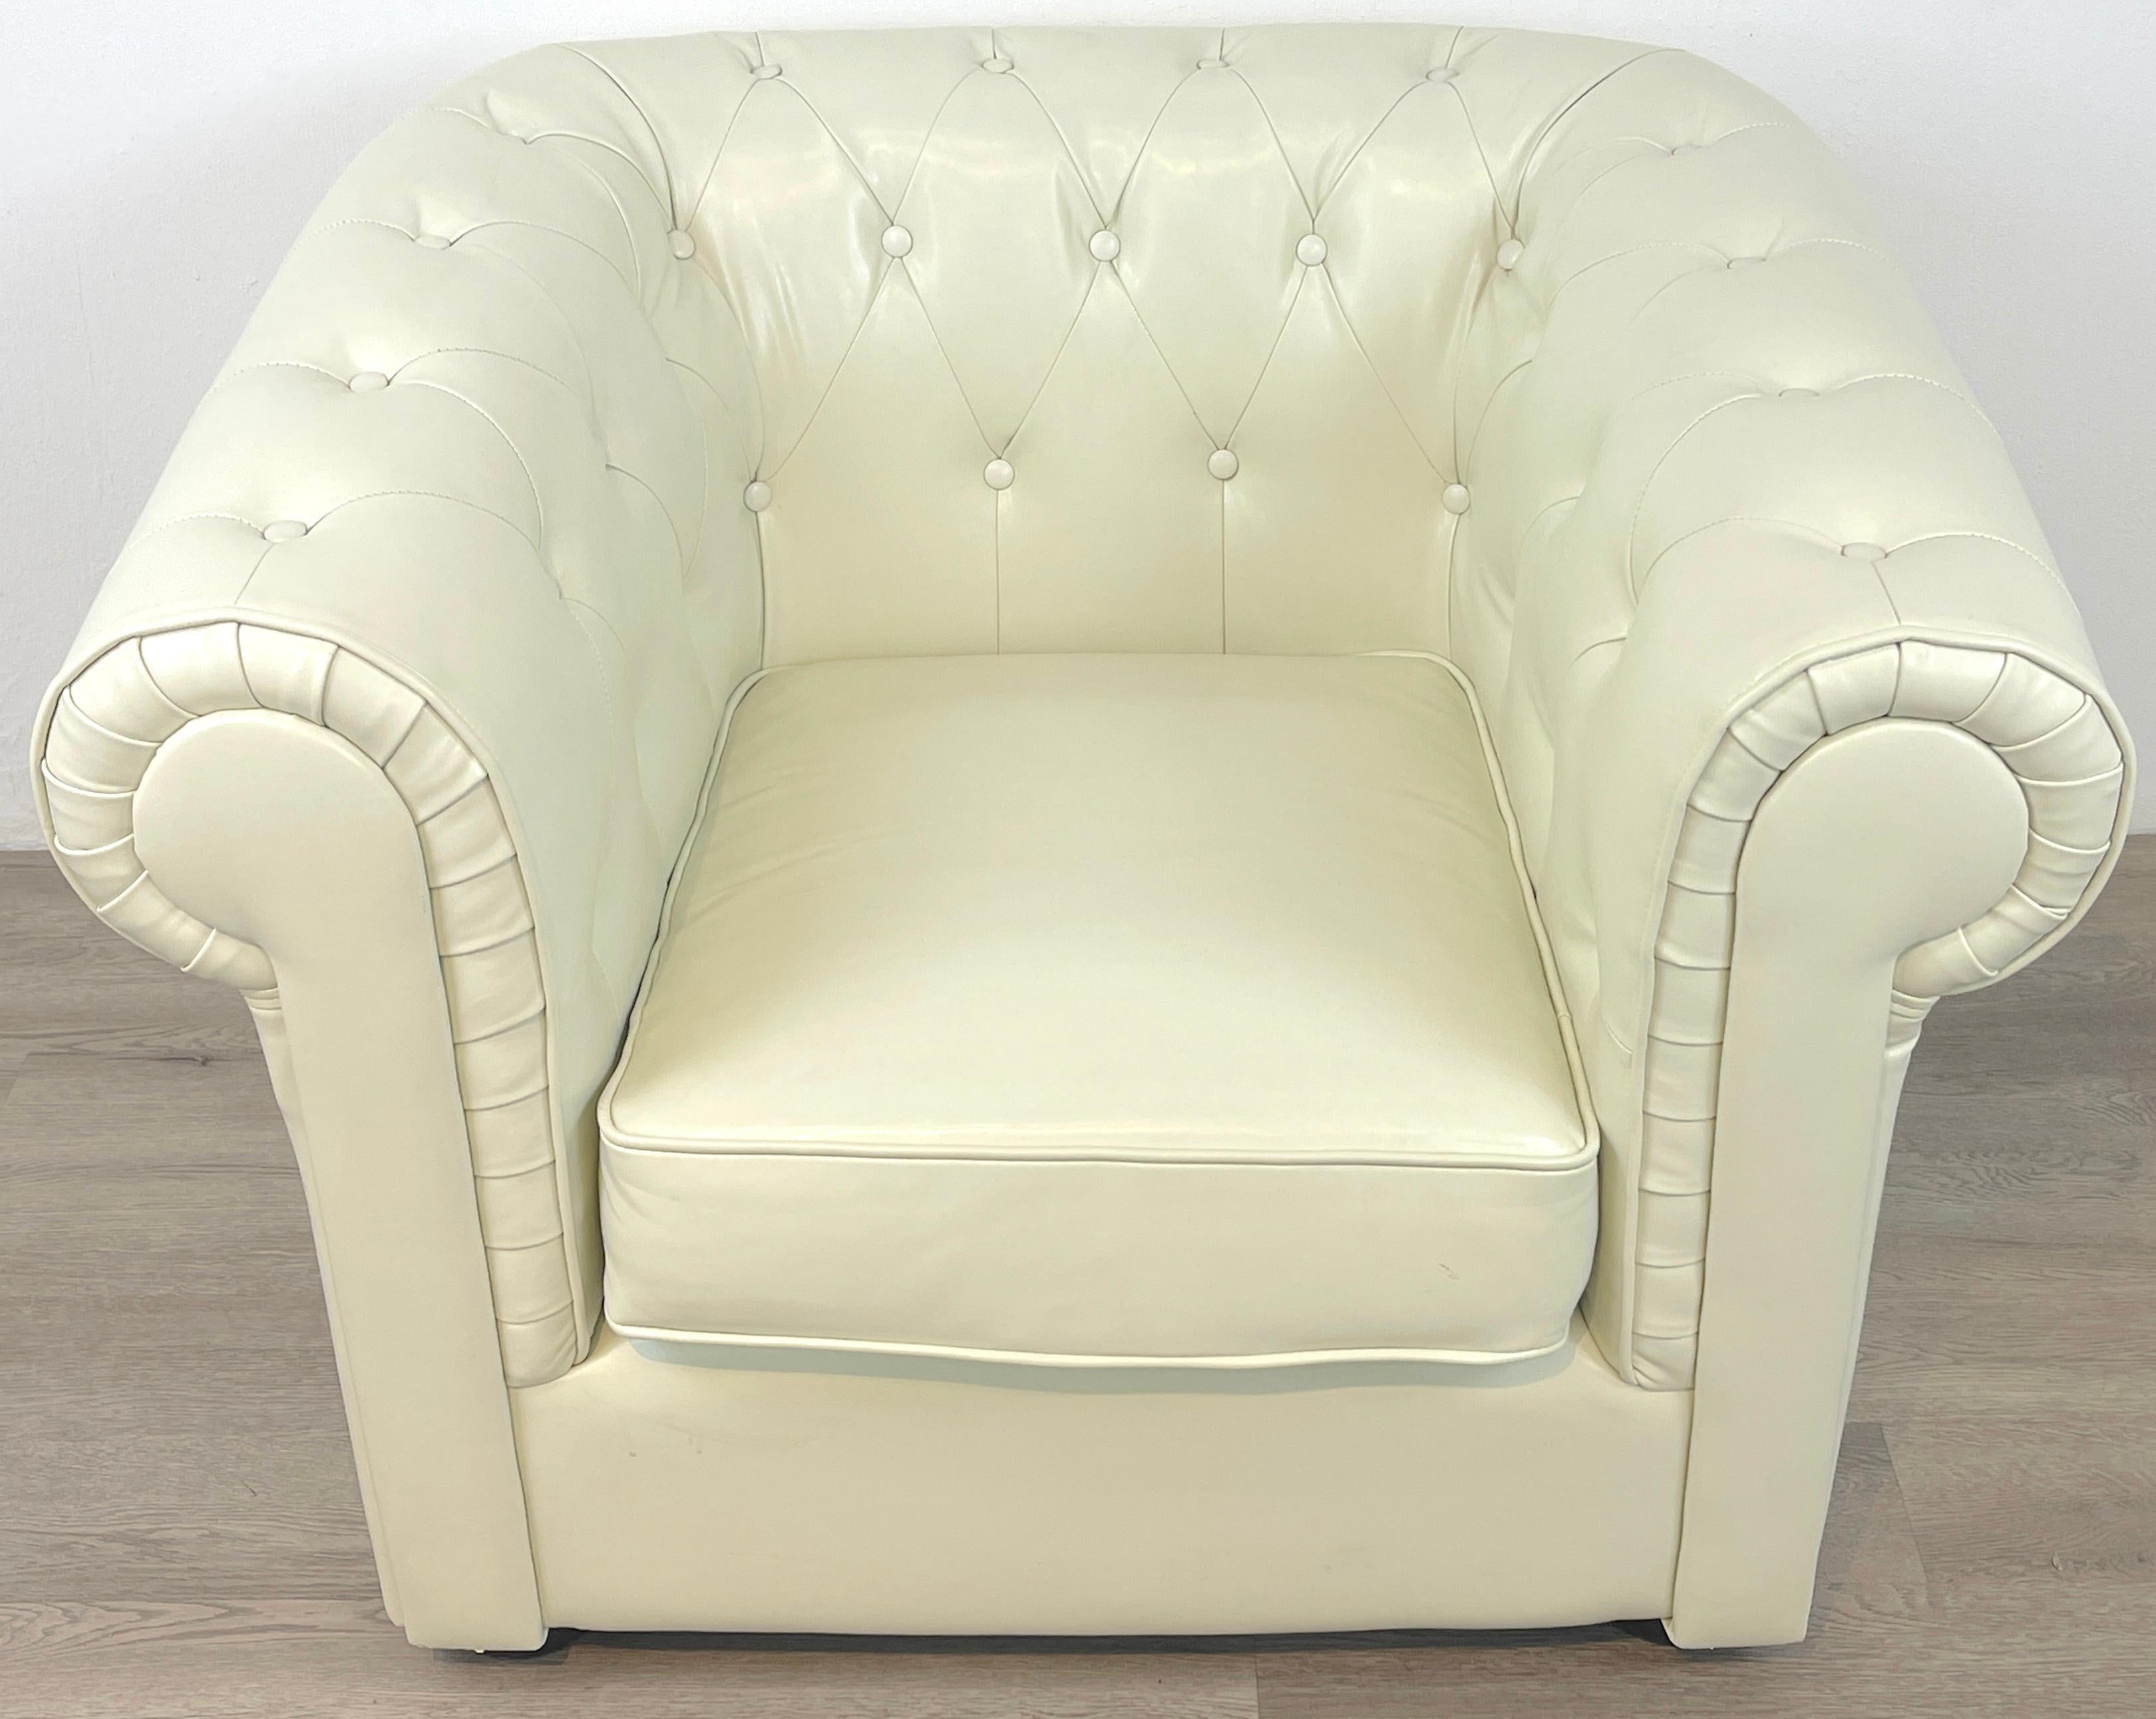 Pair of White Leather Chesterfield Club Chairs For Sale 1